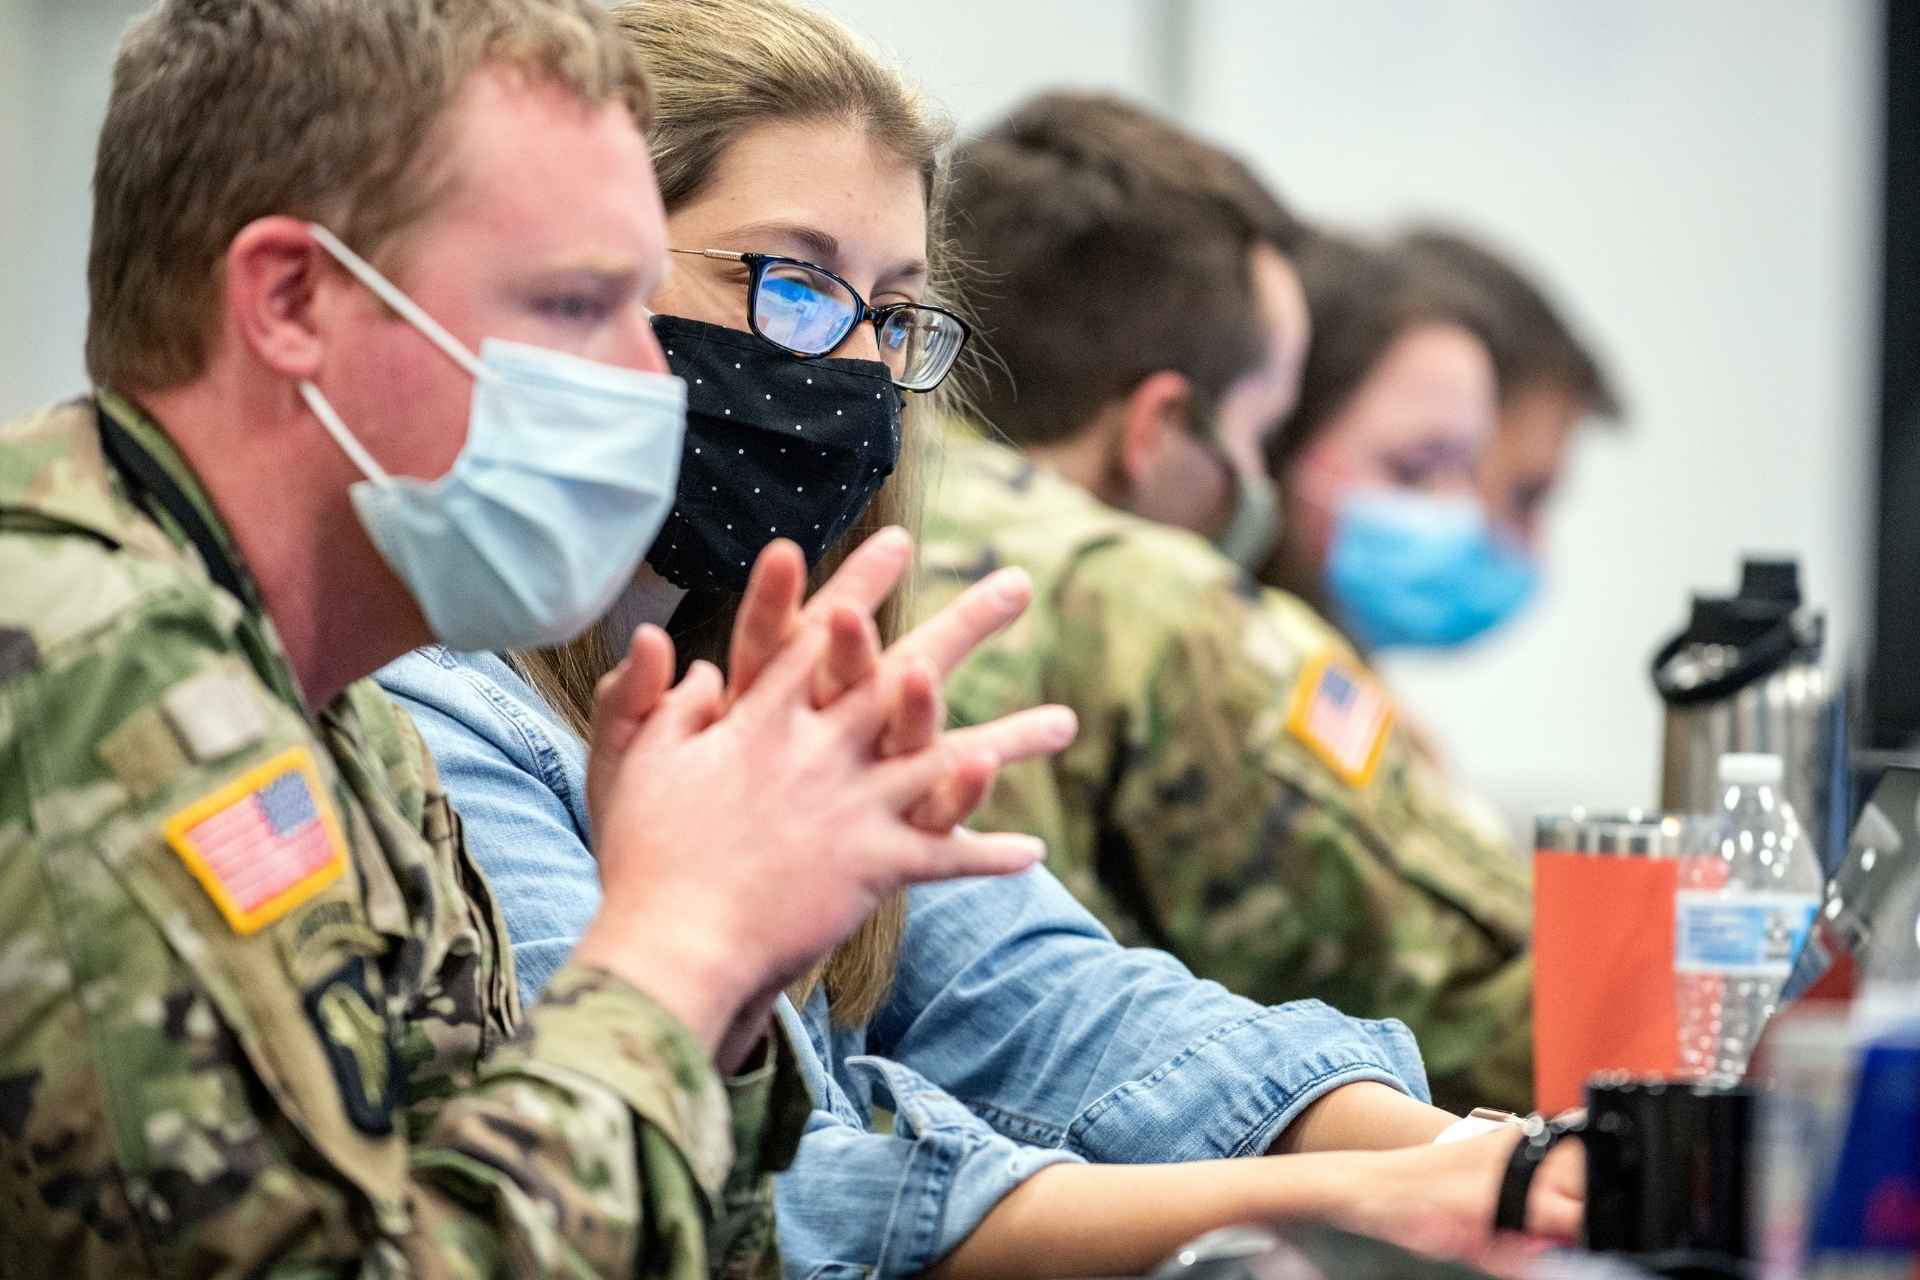 WVU computer science major Heather Fetty works with members on the West Virginia National Guard during Operation Locked Shield, an international cybersecurity training exercise. (WVU Photo/Brian Persinger)